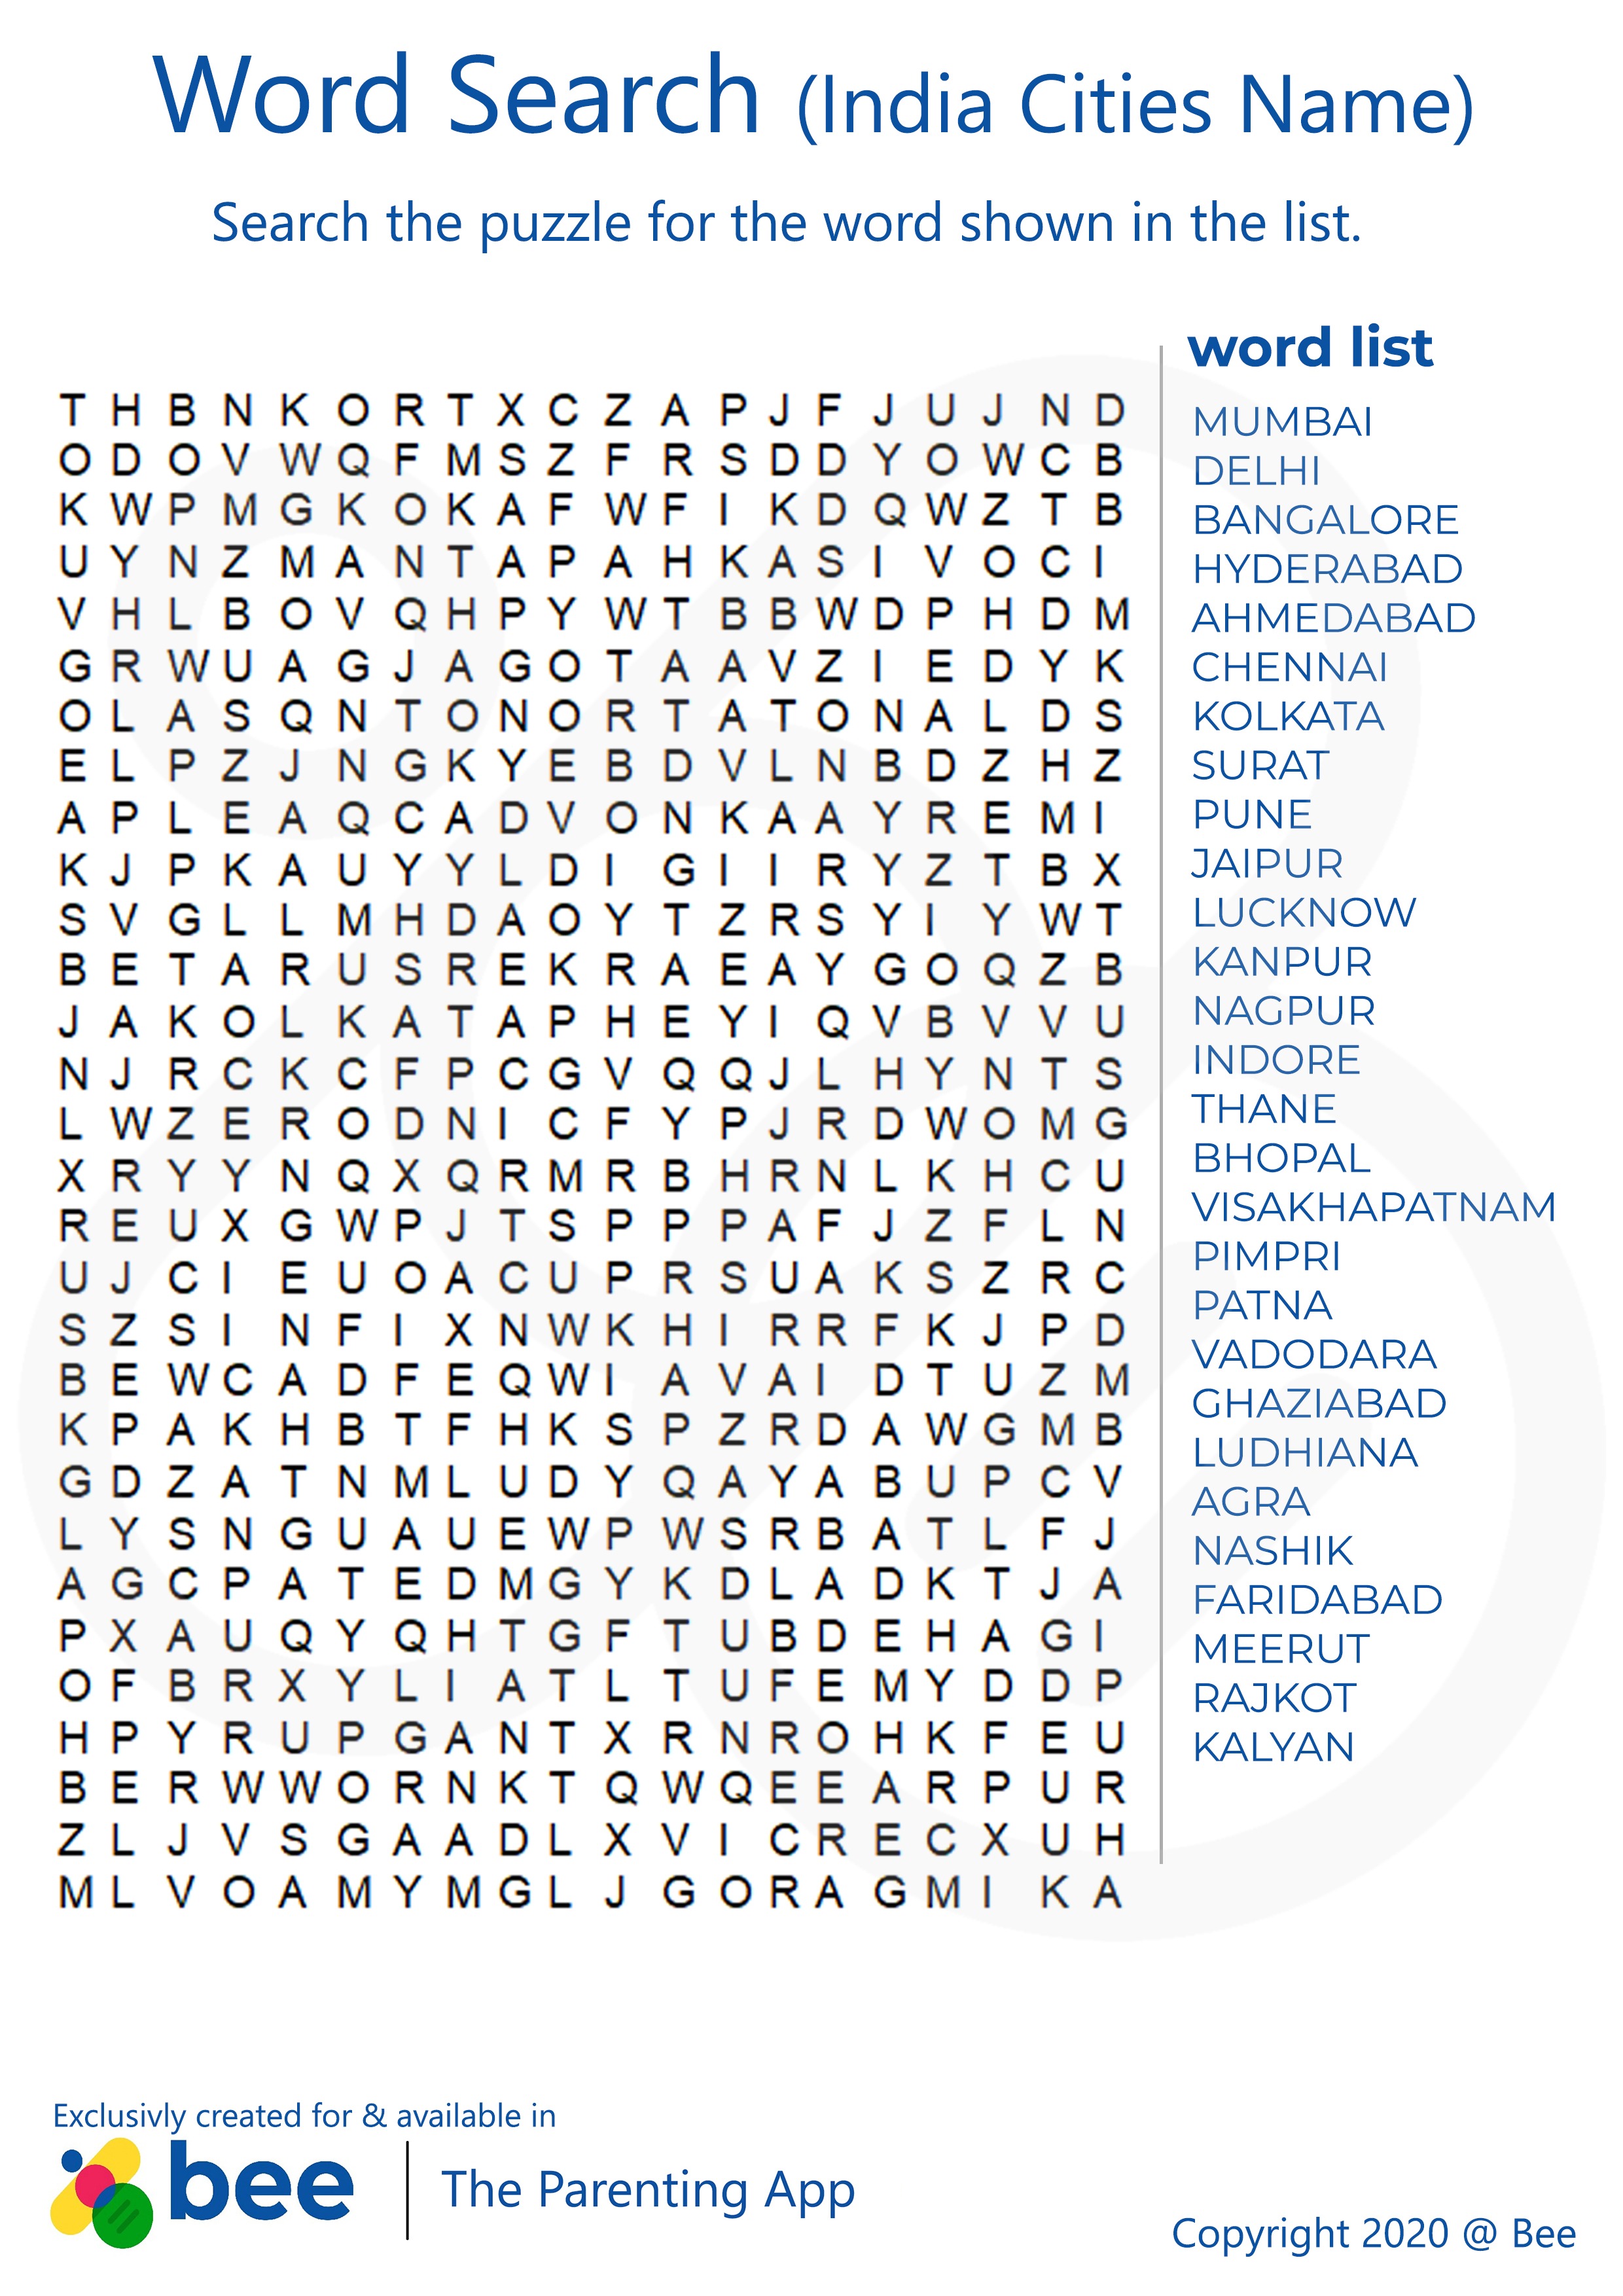 Indian cities Search Word Puzzle